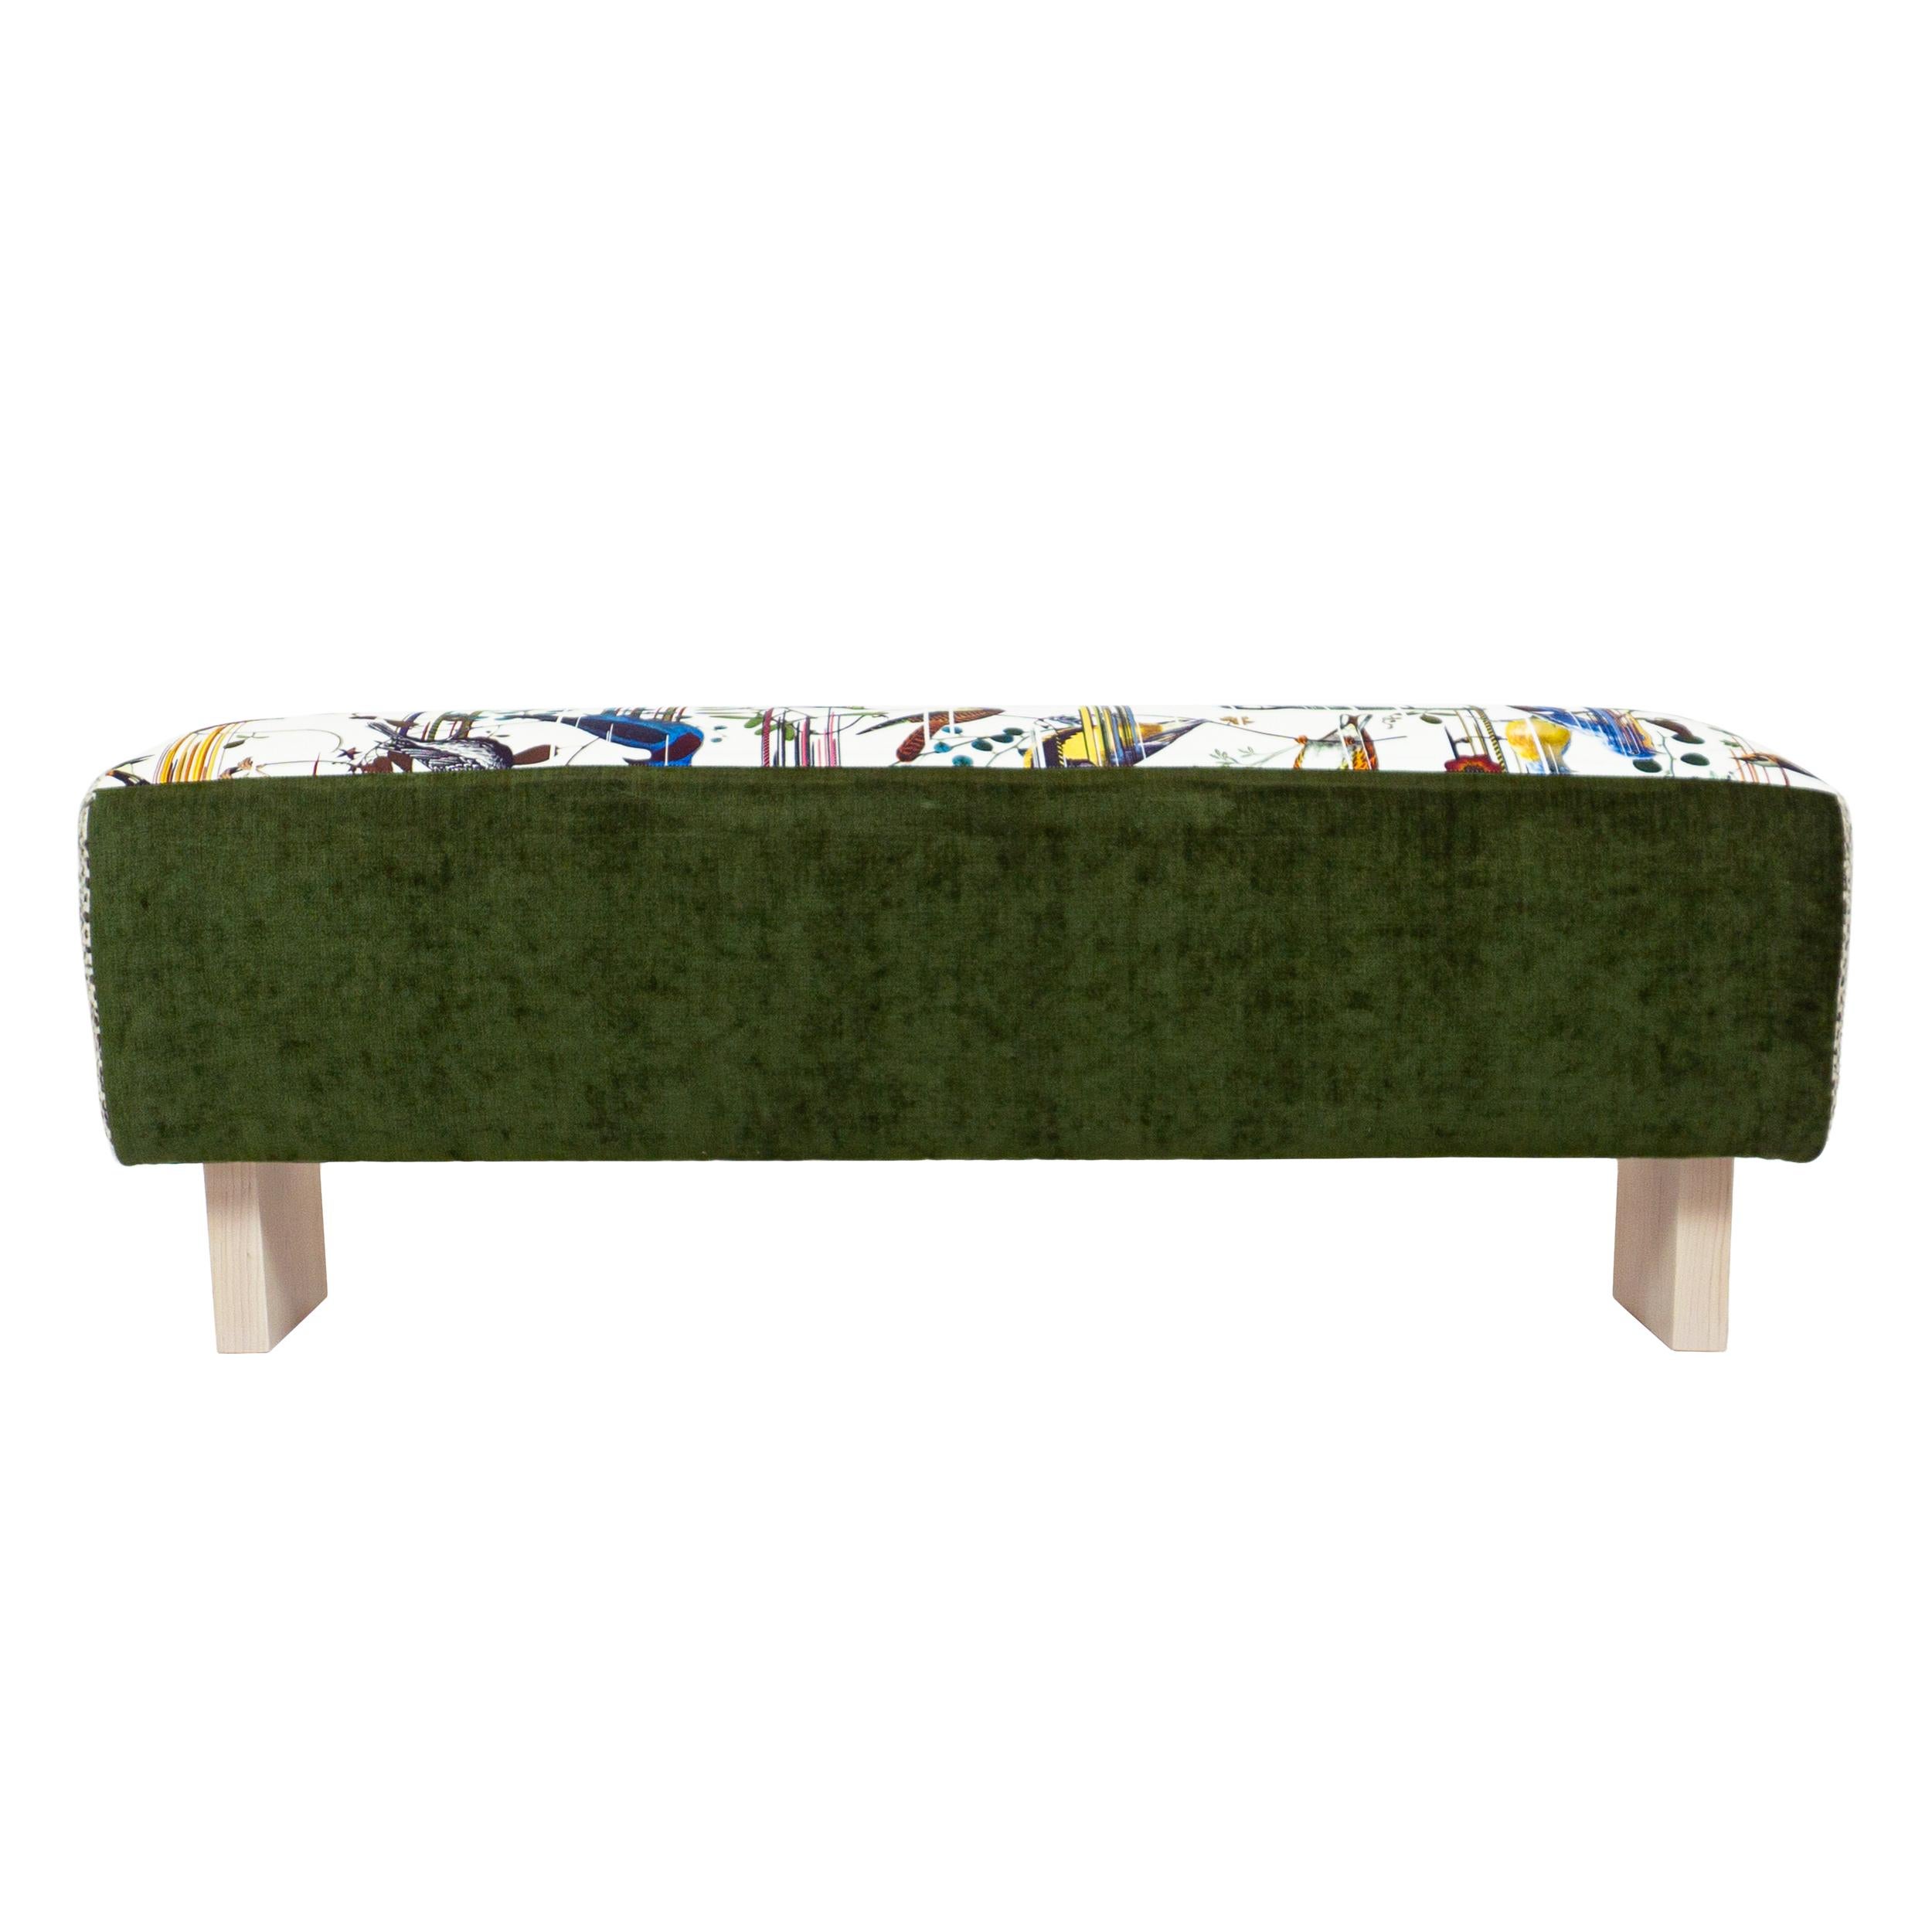 Contemporary Modern Sloped Bench w/ Bird Print, Green Velvet and Wool Boucle For Sale